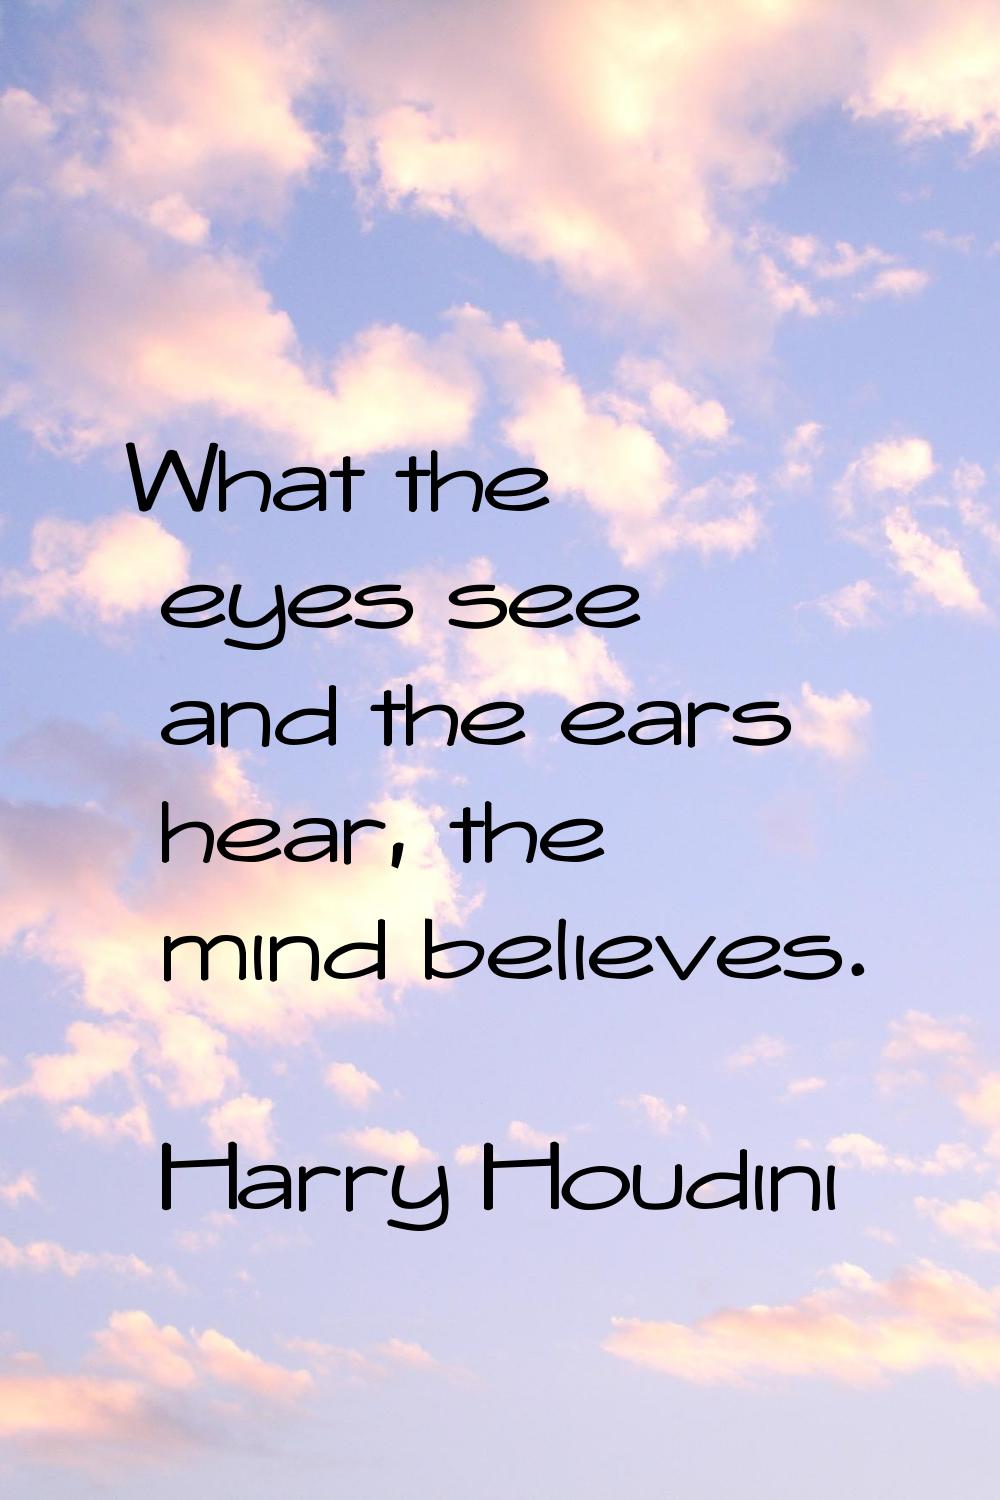 What the eyes see and the ears hear, the mind believes.